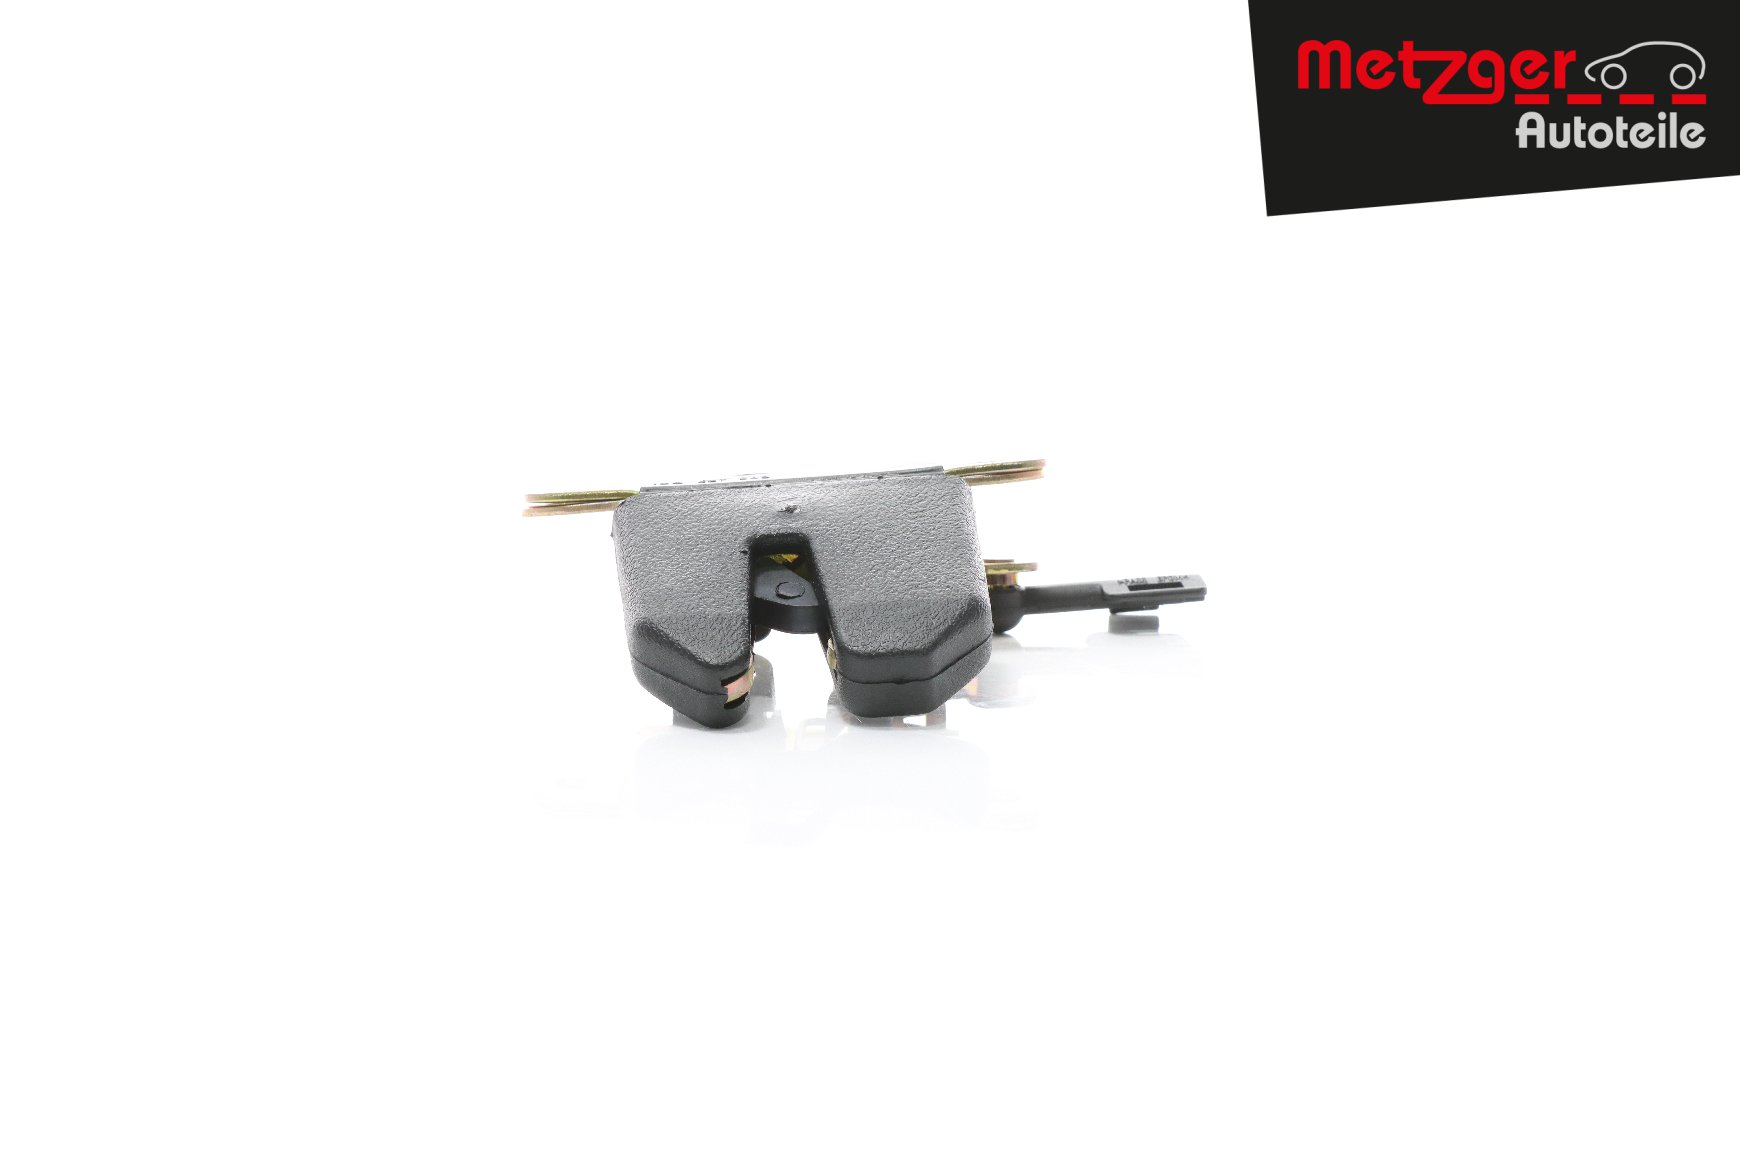 Great value for money - METZGER Tailgate Lock 2310518